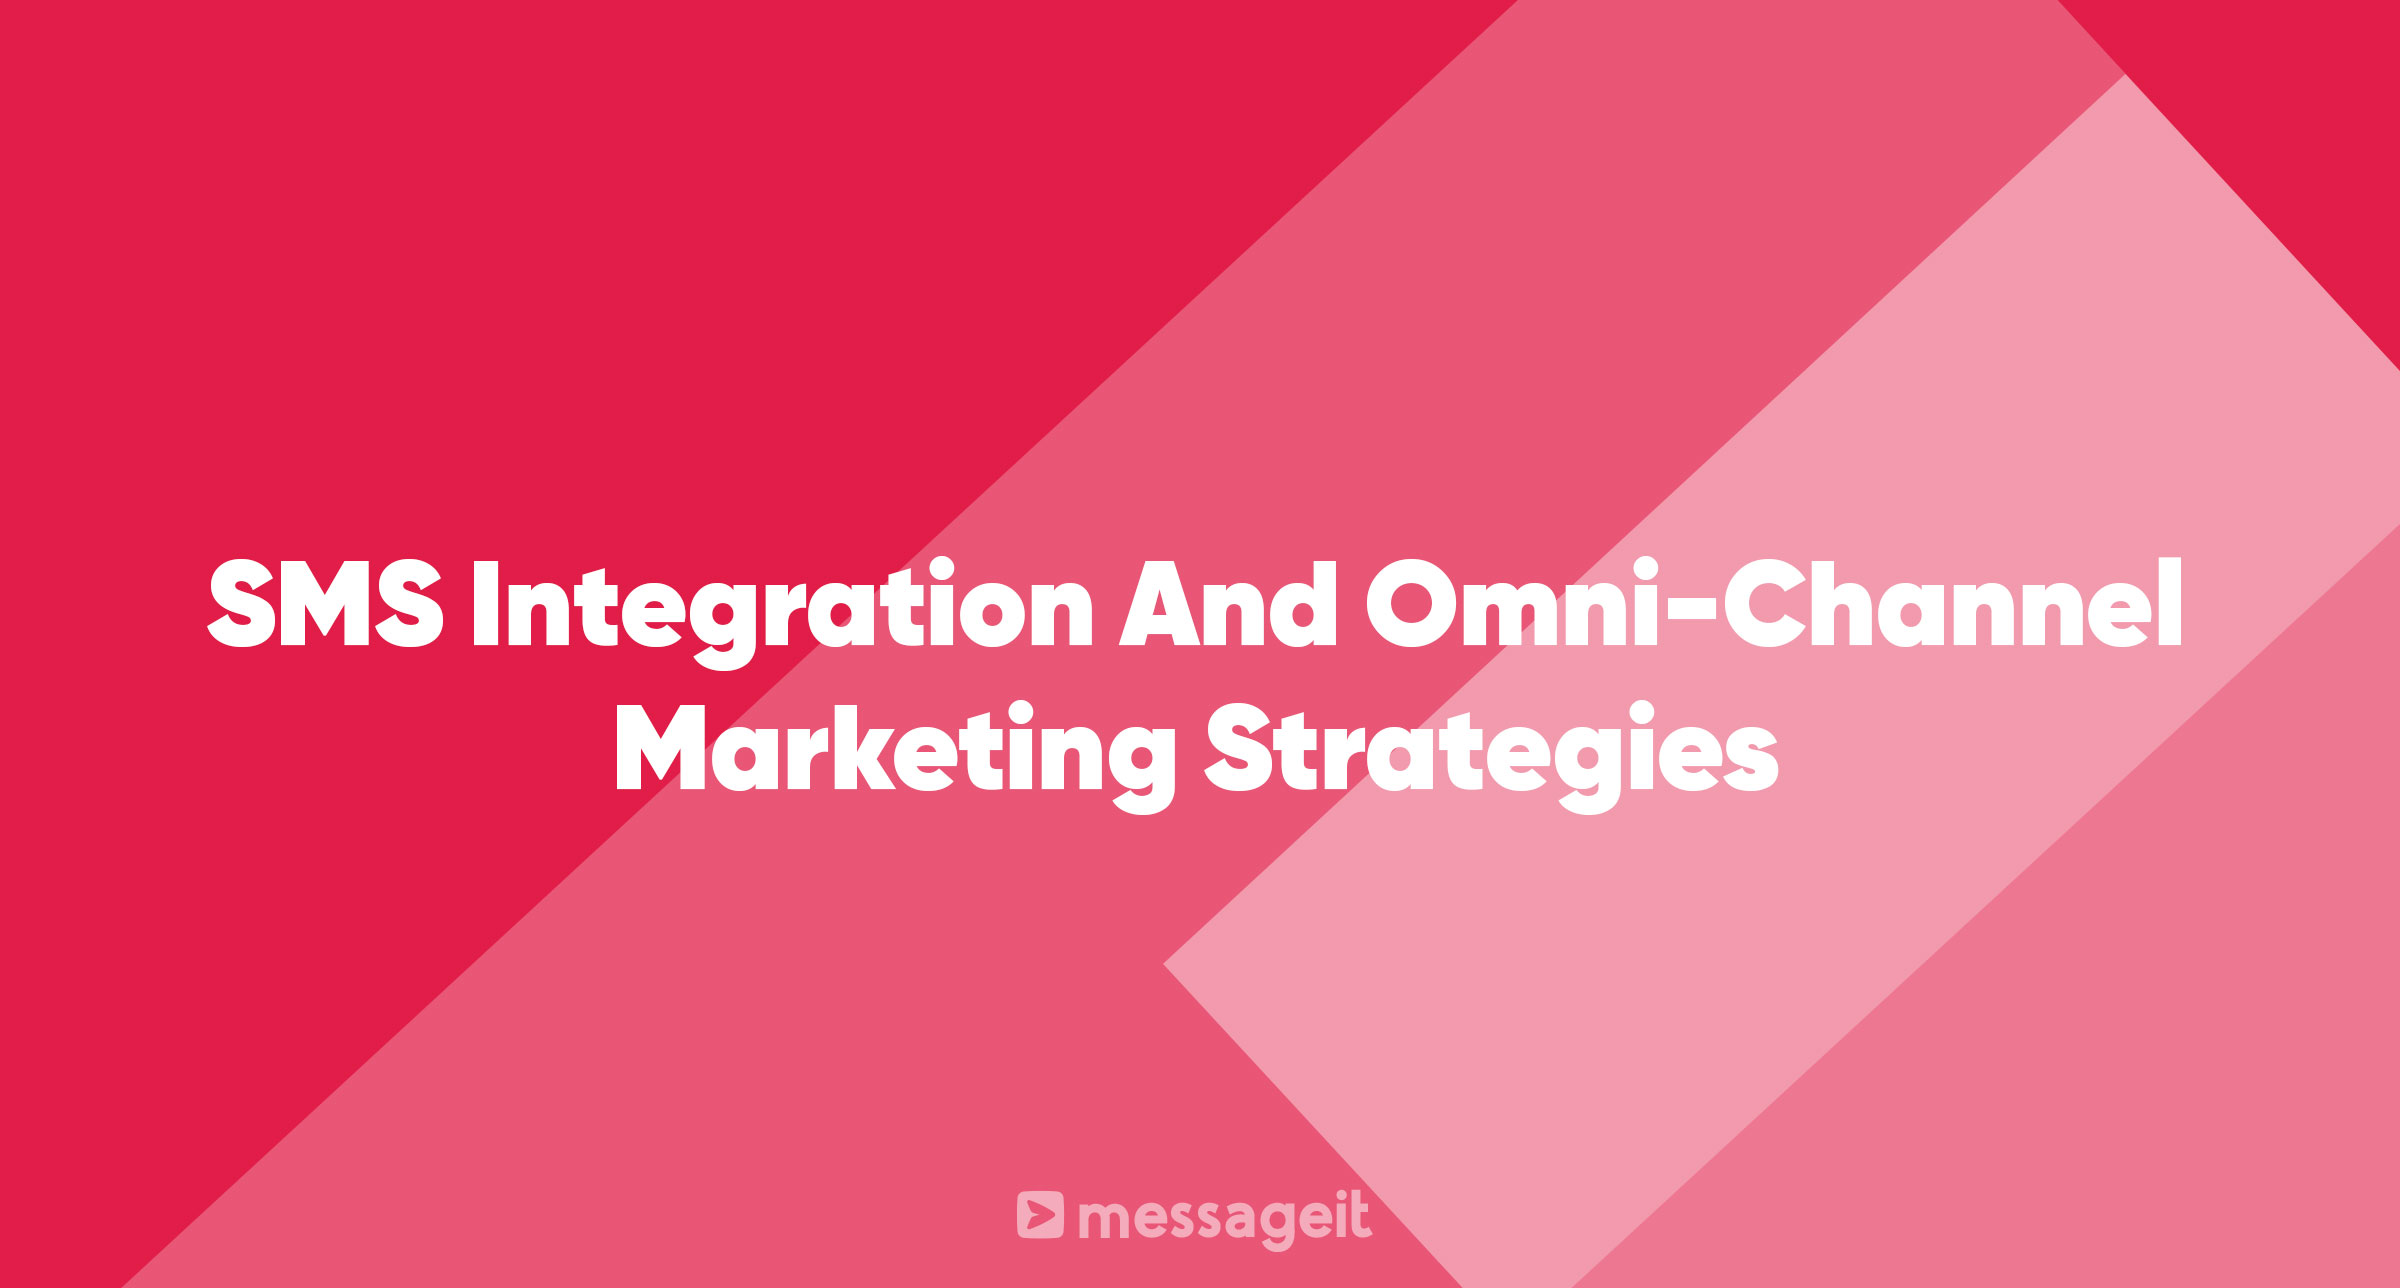 Article | SMS Integration And Omni-Channel Marketing Strategies